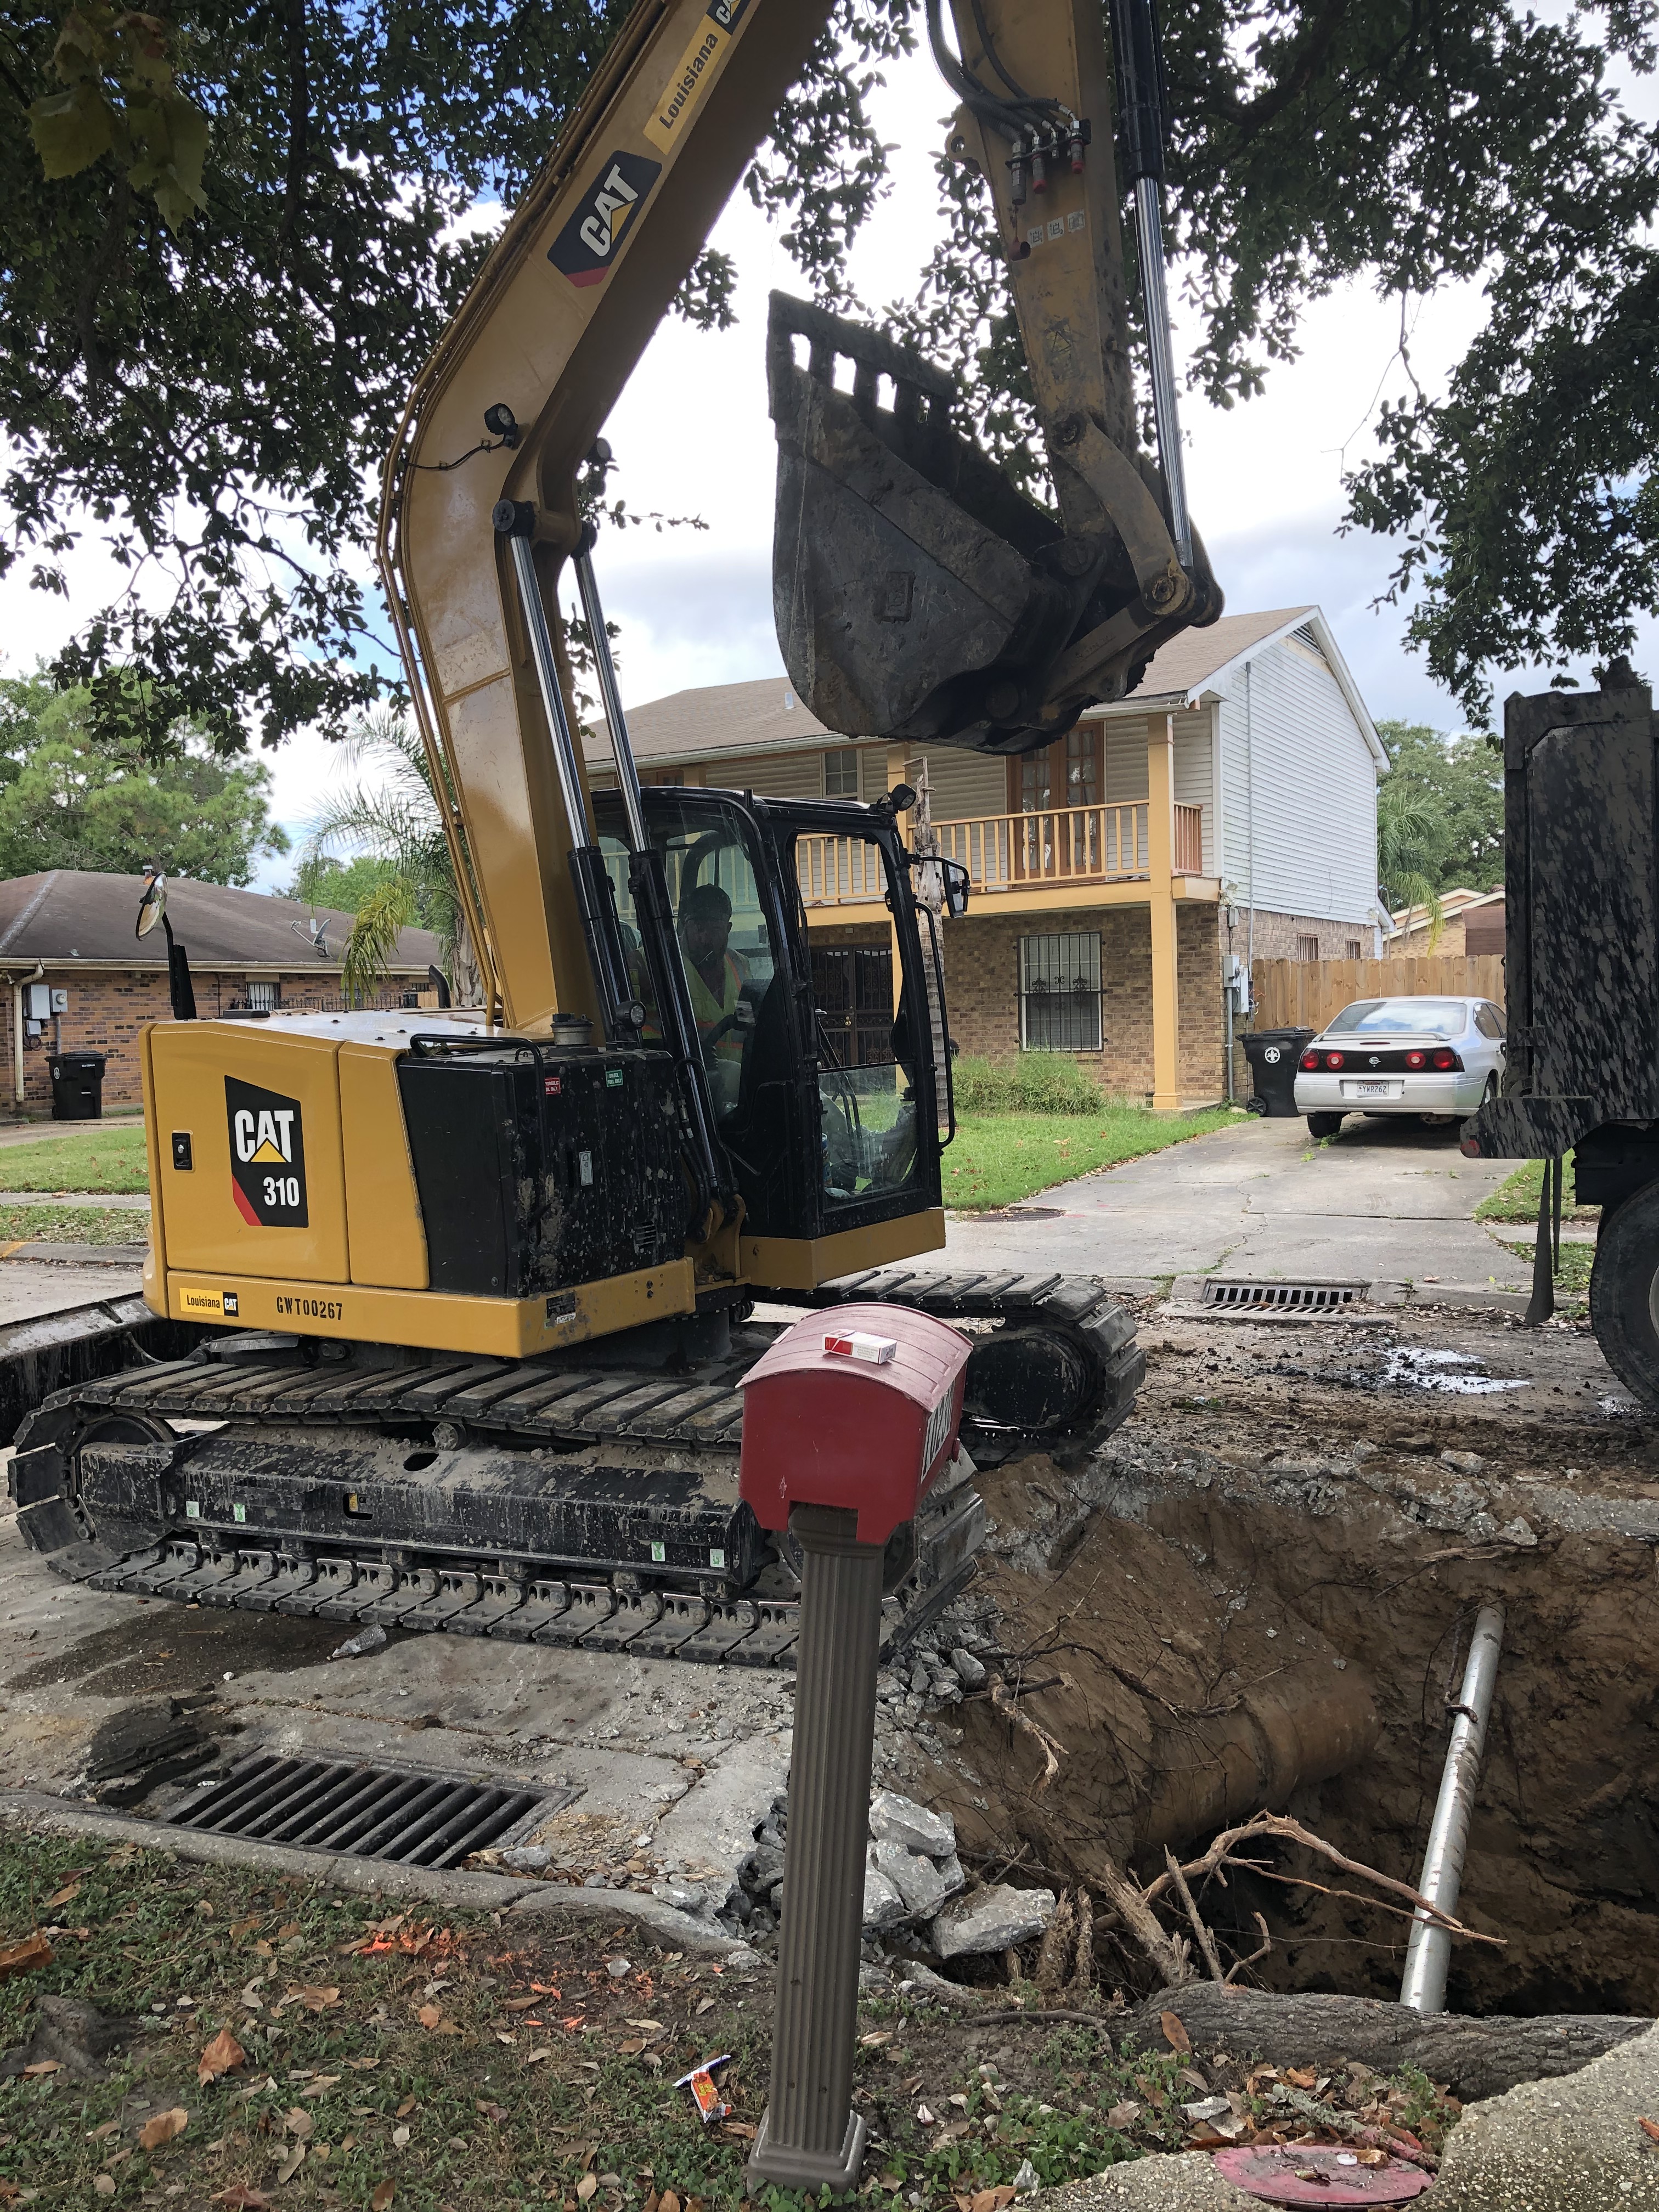 CREWS ADDRESS WATER AND SEWER LINE REPLACEMENTS IN LITTLE WOODS NEIGHBORHOOD